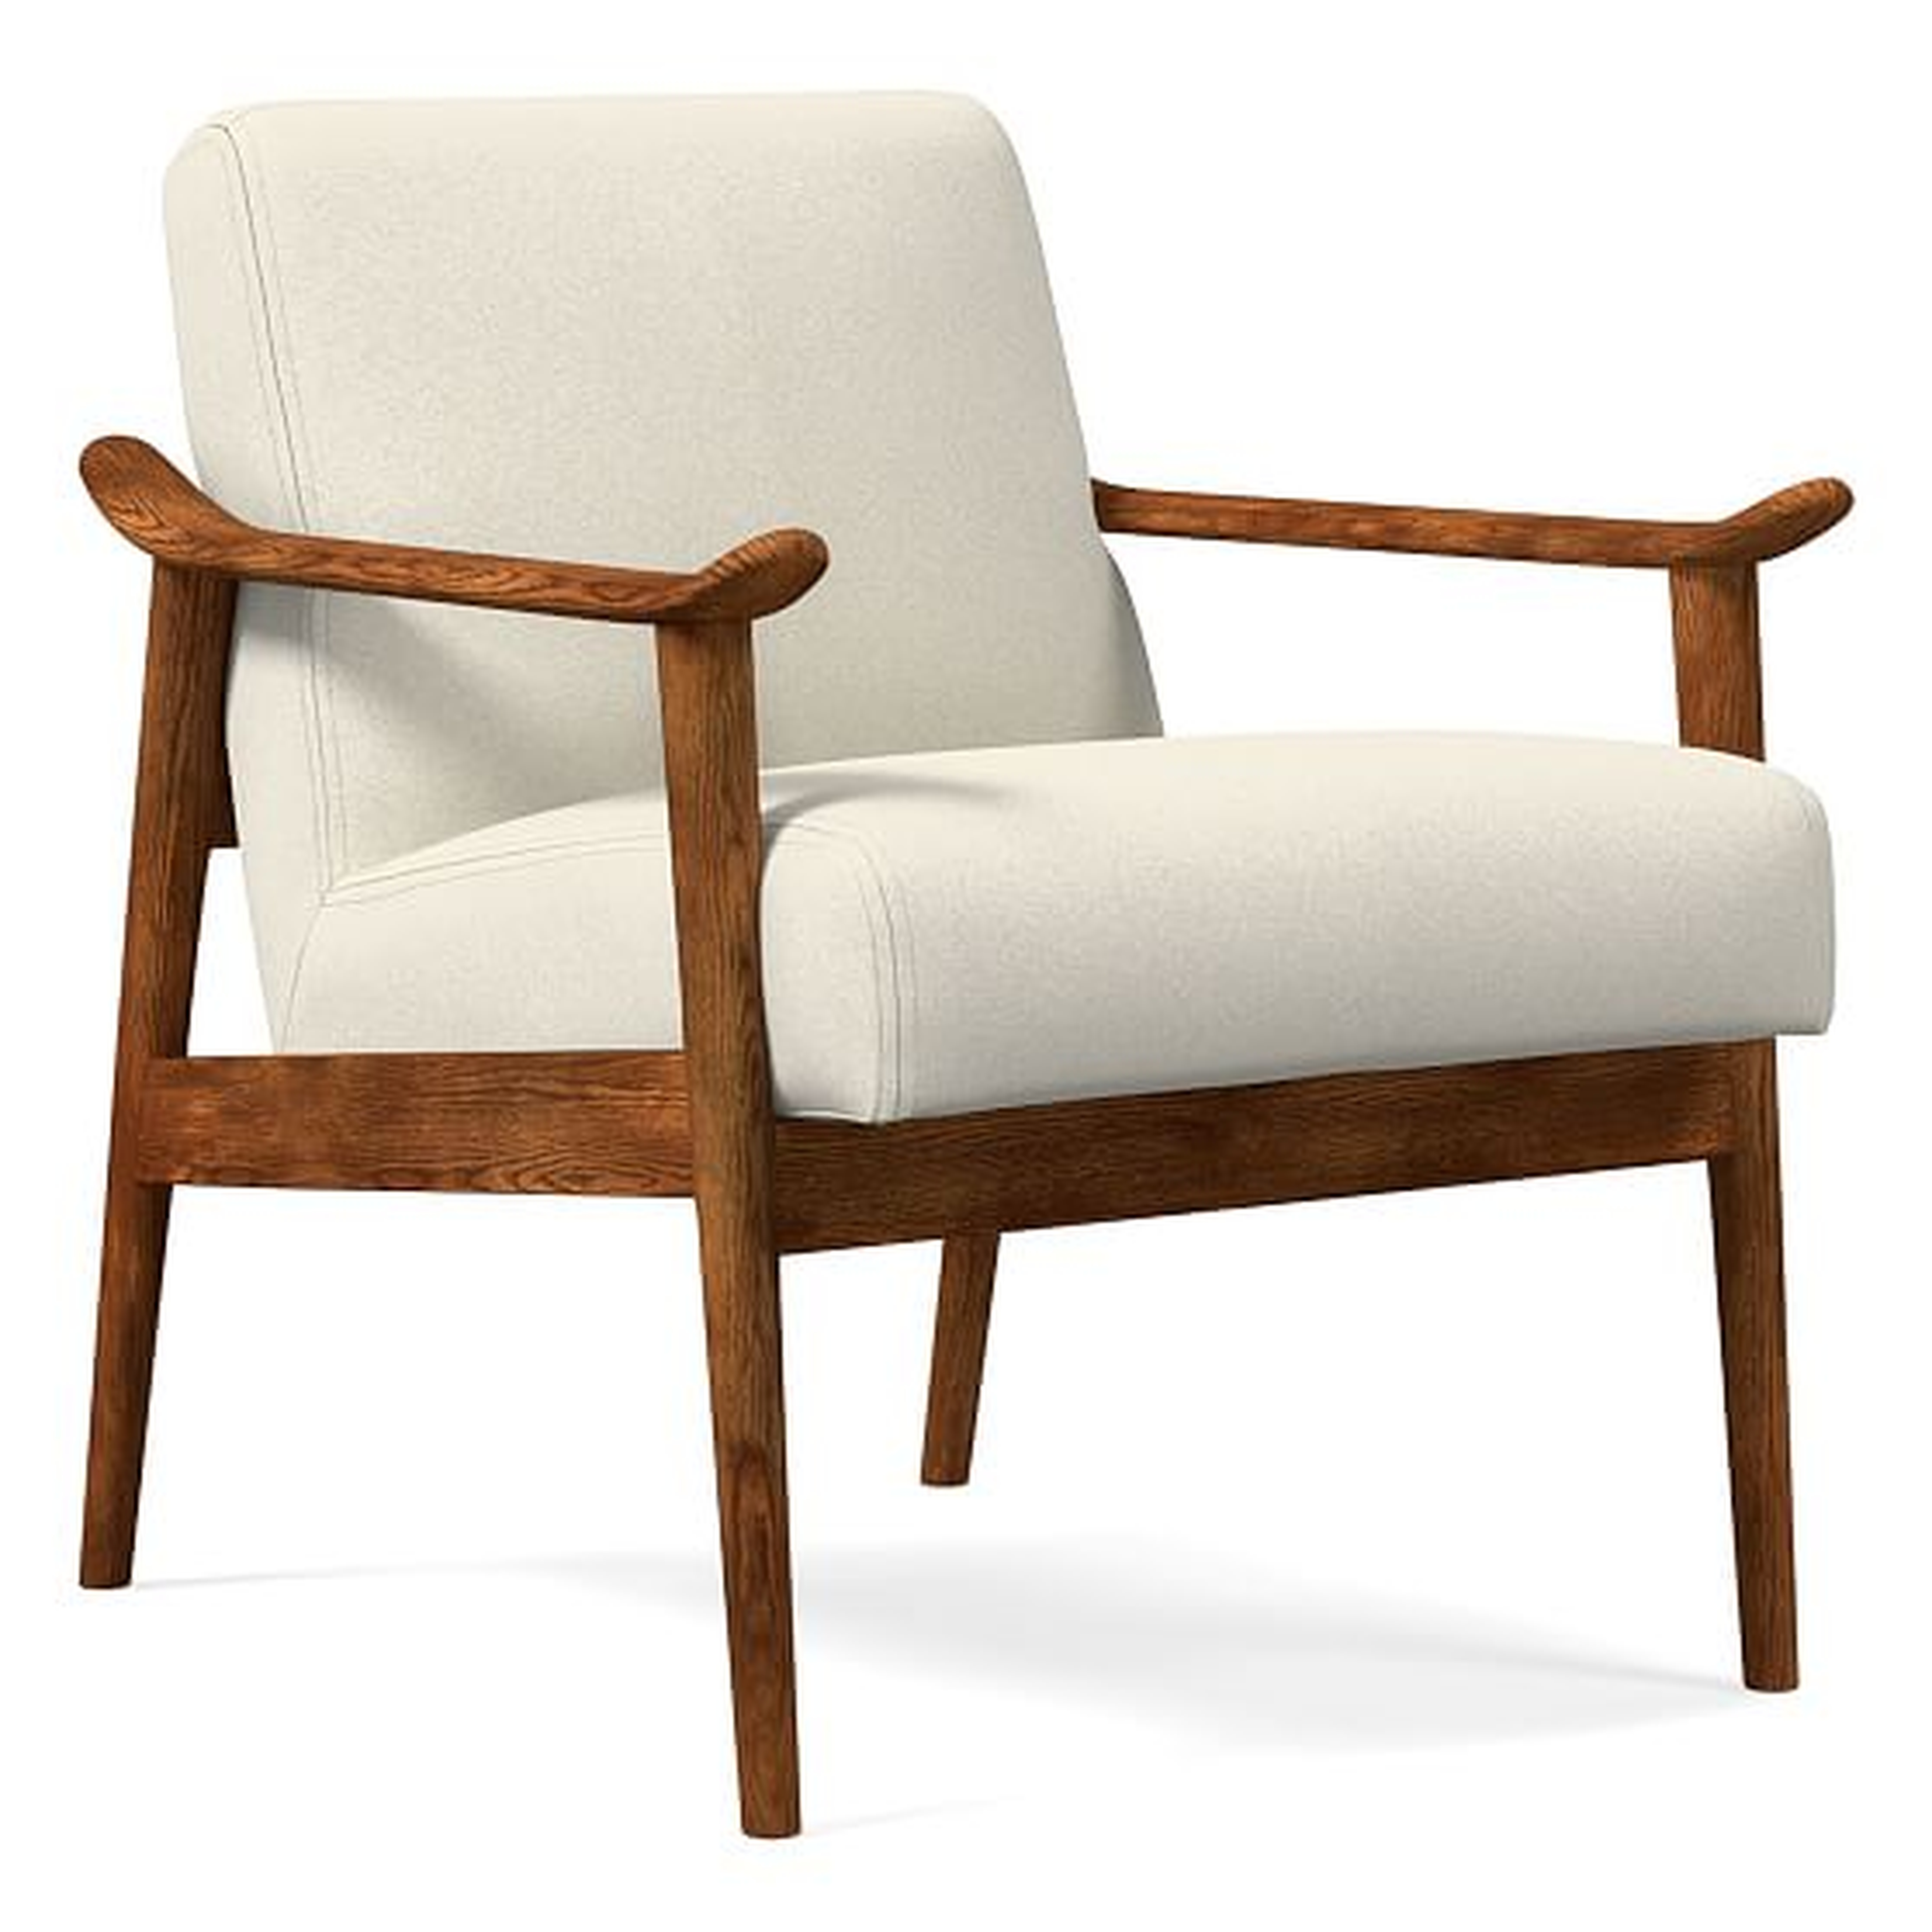 Midcentury Show Wood Chair, Poly, Luxe Boucle, Stone White, Pecan - West Elm